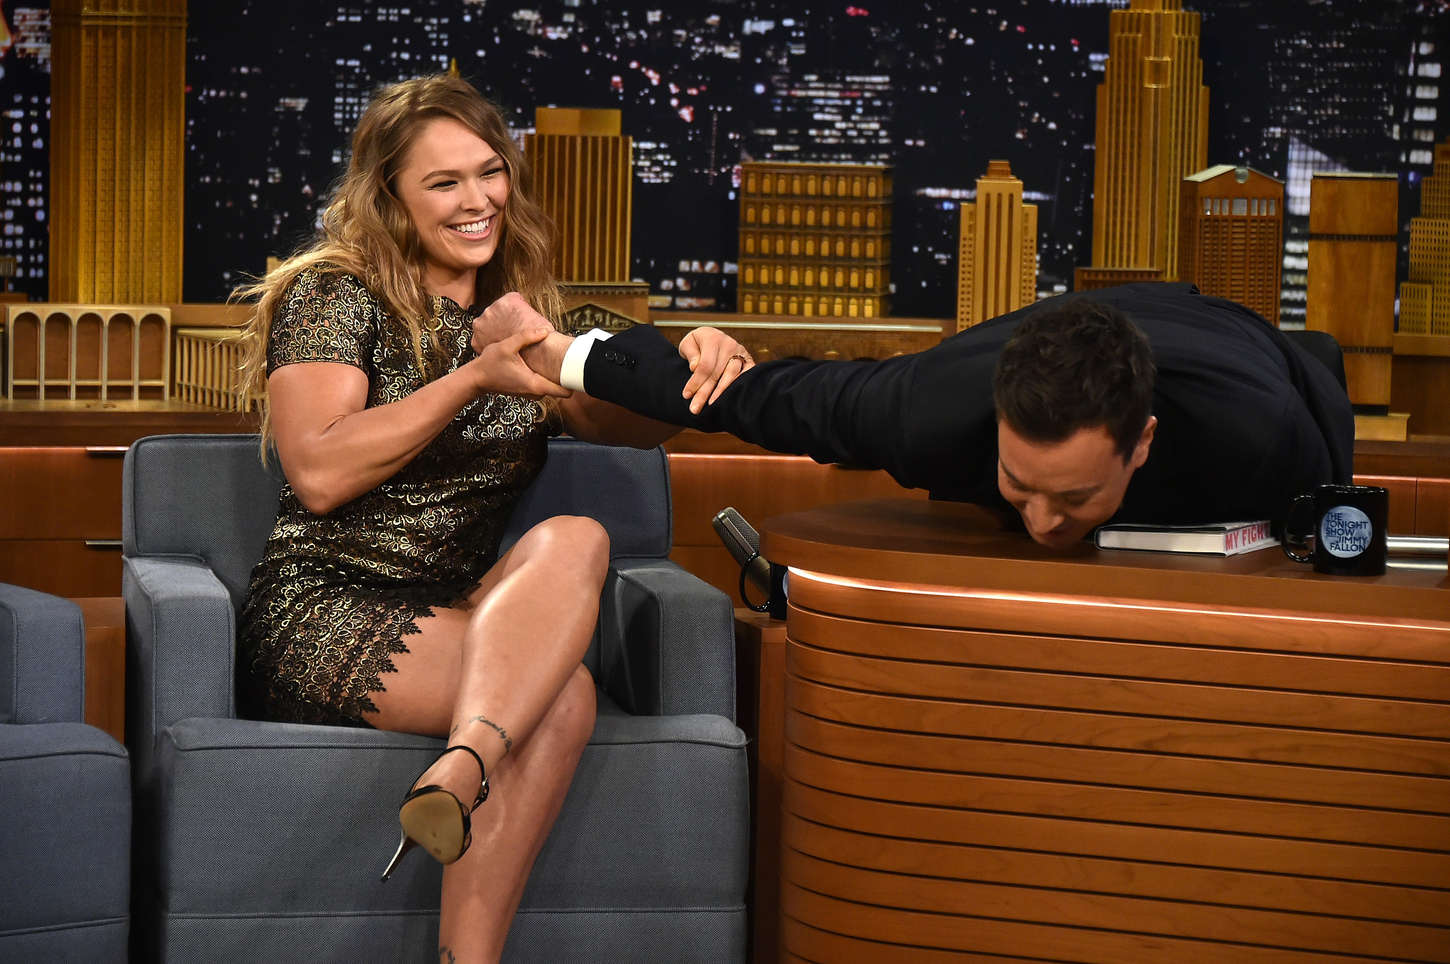 Ronda-Rousey-Leggy-at-The-Tonight-Show-With-Jimmy-Fallon--03.jpg